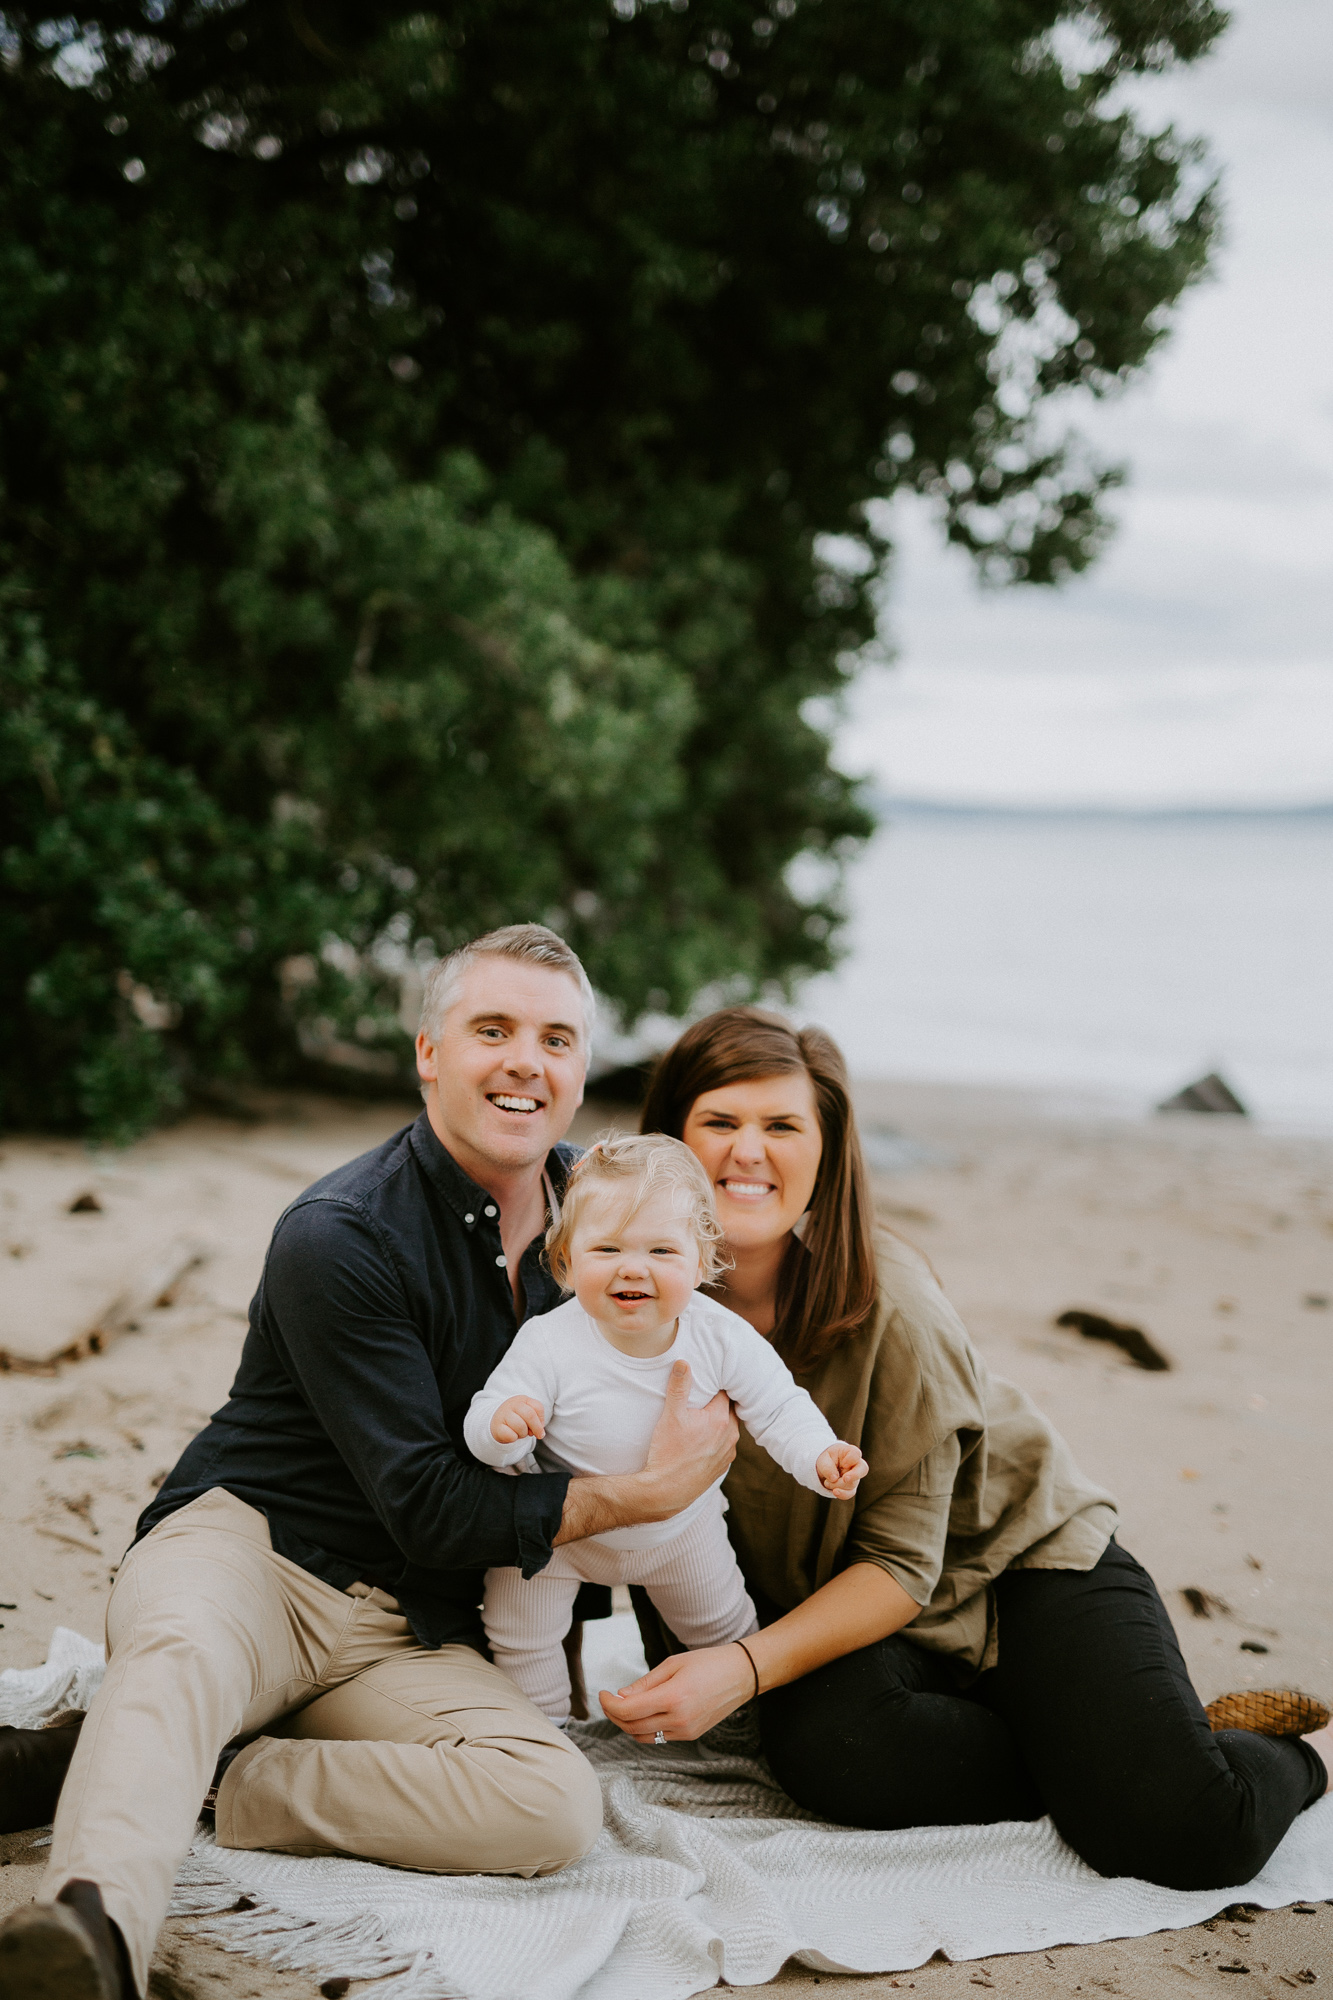 Hinsby Beach Family by Ulla Nordwood – 0036